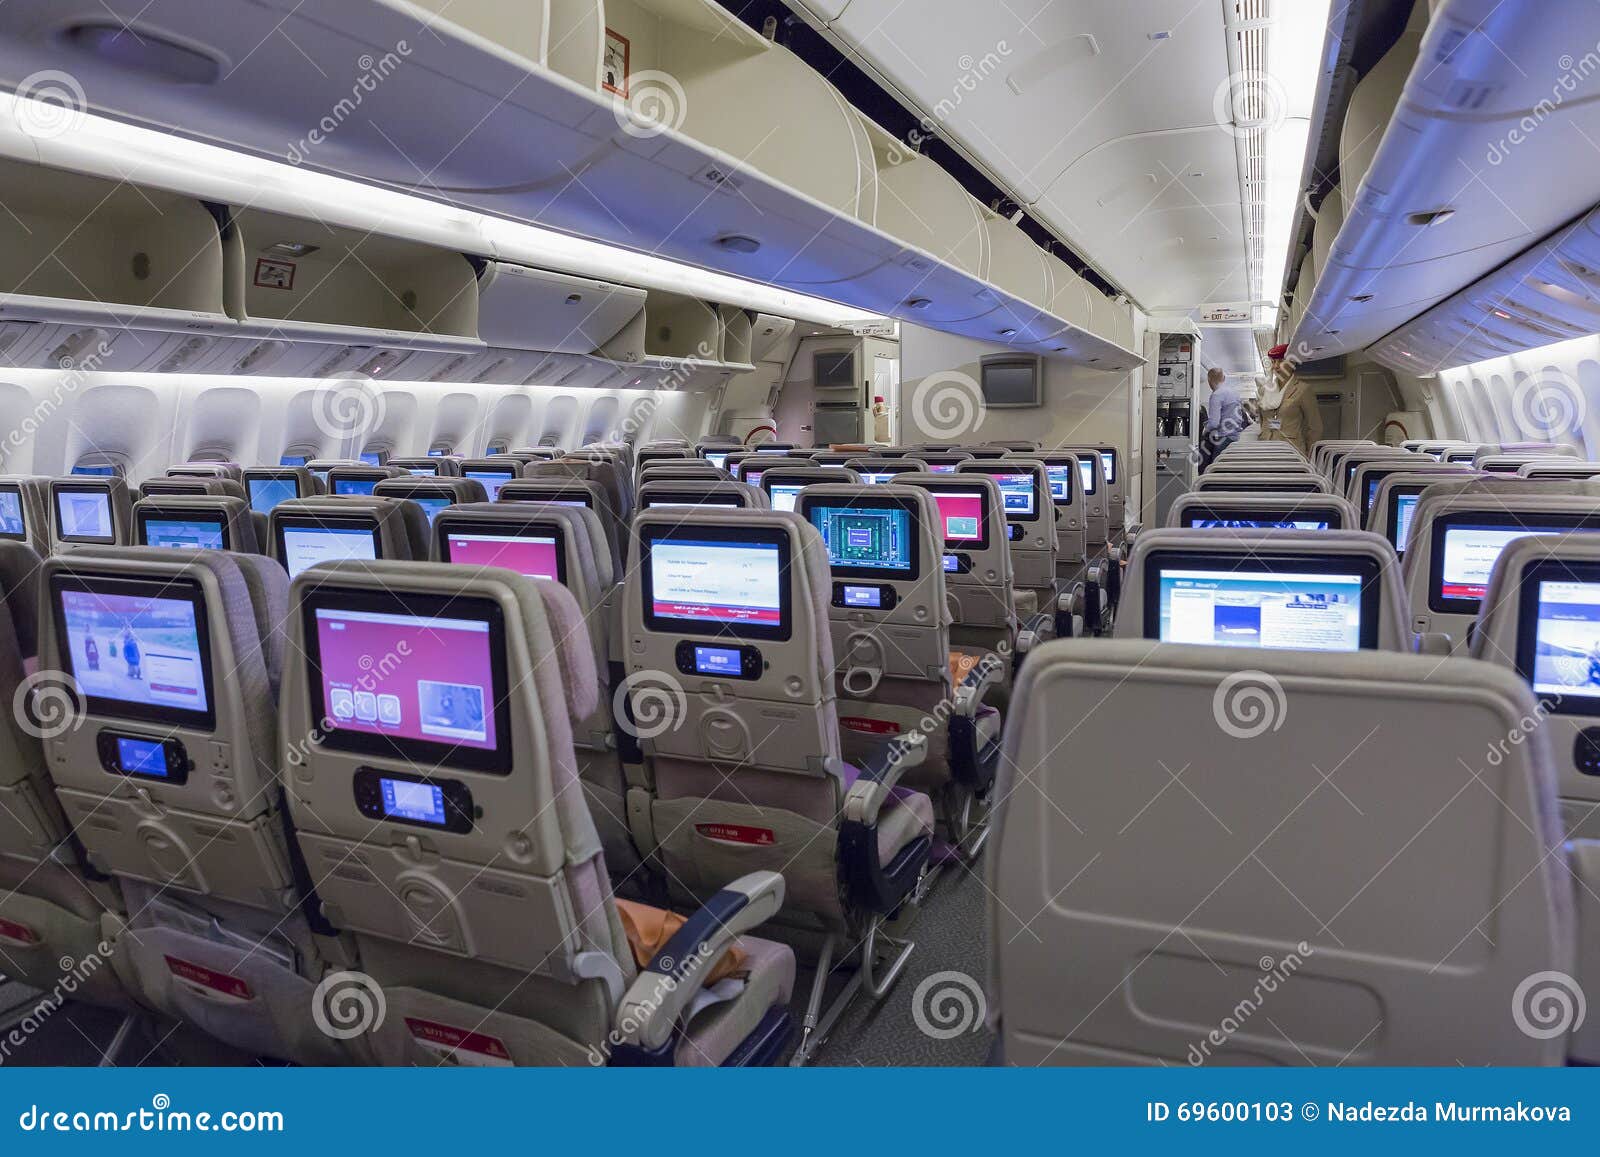 Boeing 777 Emirates Economy Class With Tv Touch Screen